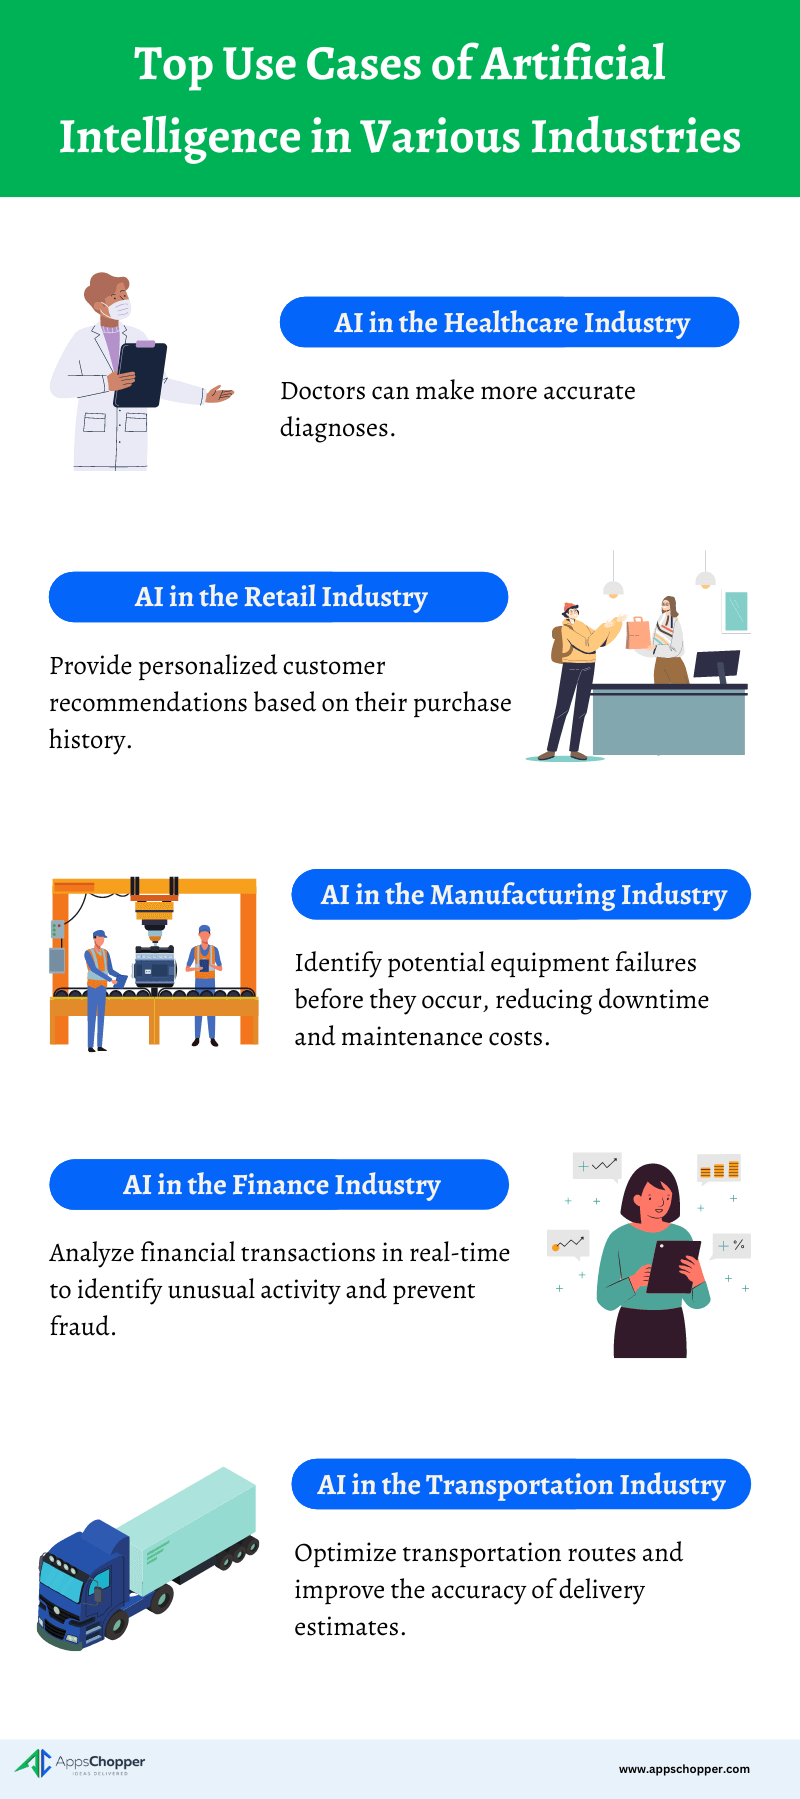 Main use cases of artificial intelligence in various industries